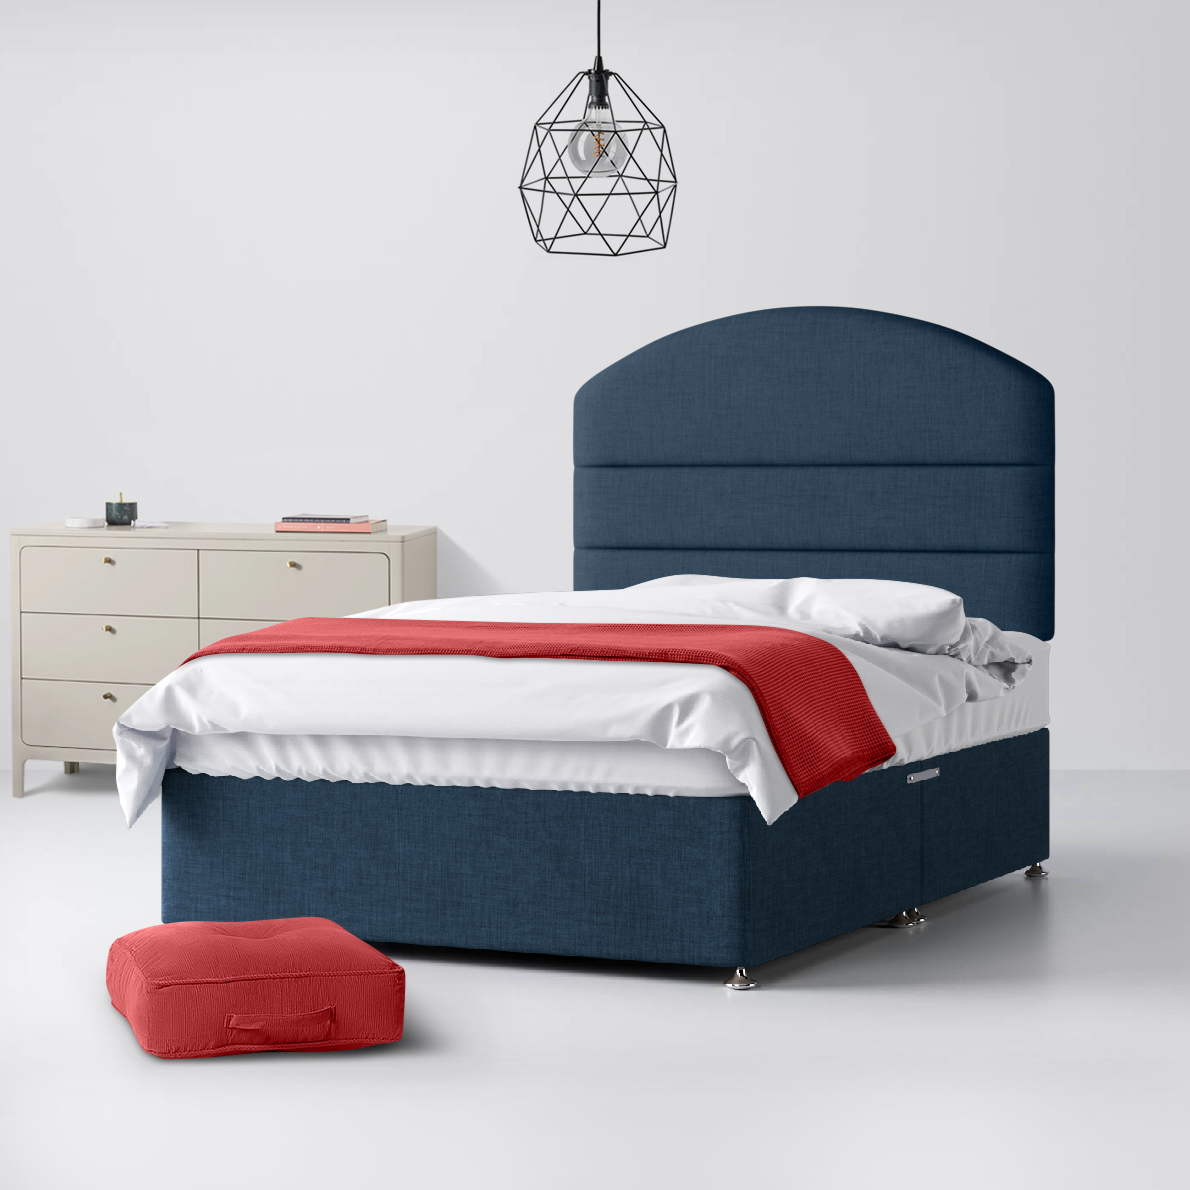 Small Double - Divan Bed and Dudley Lined Headboard - Dark Blue - Fabric - 4ft - Happy Beds